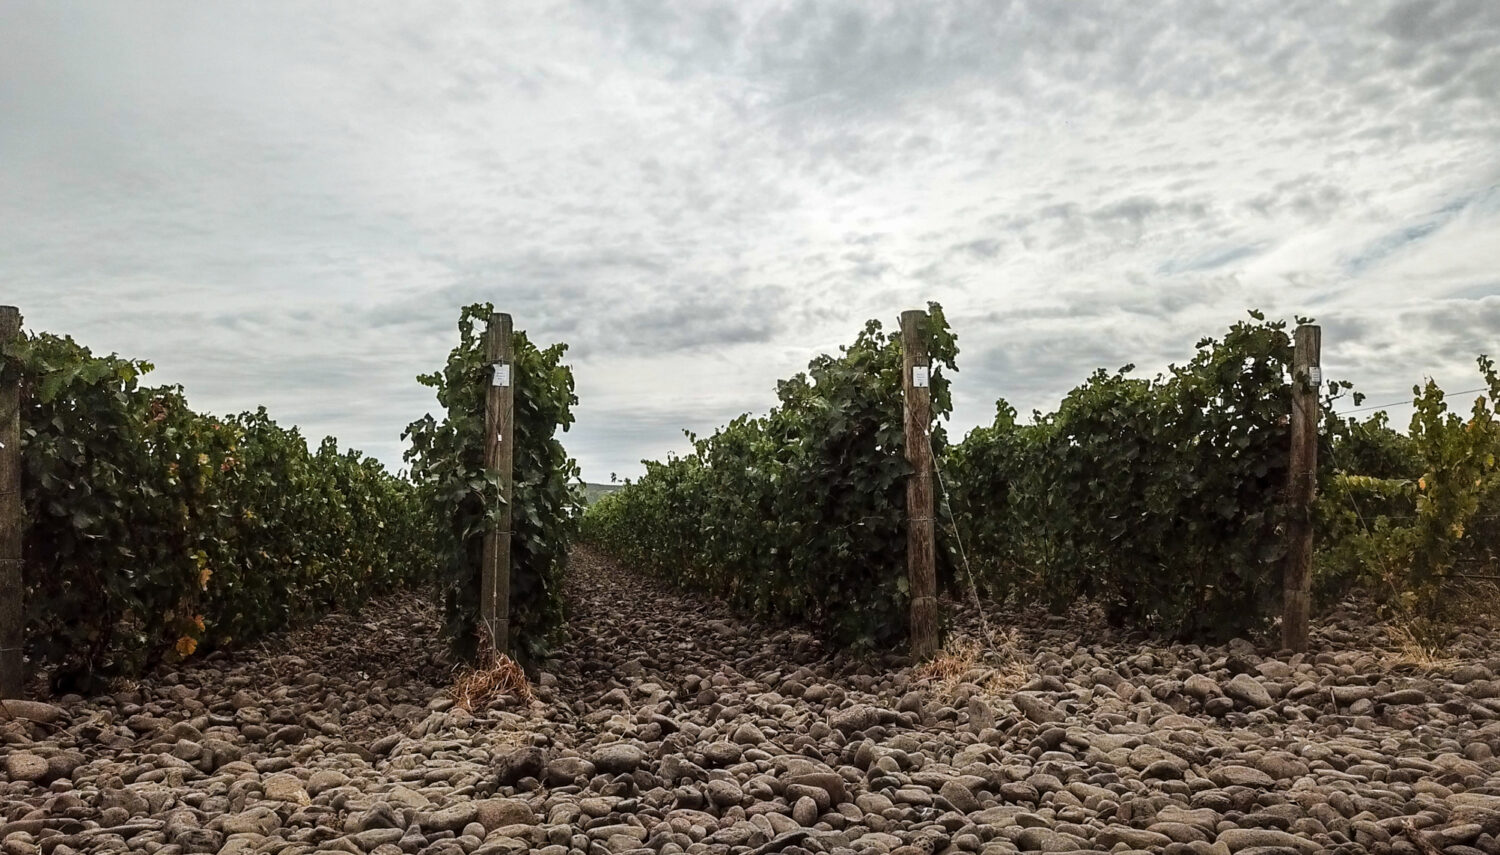 Rocks line the ground between rows of green grape vines. The sky above is overcast and grey.